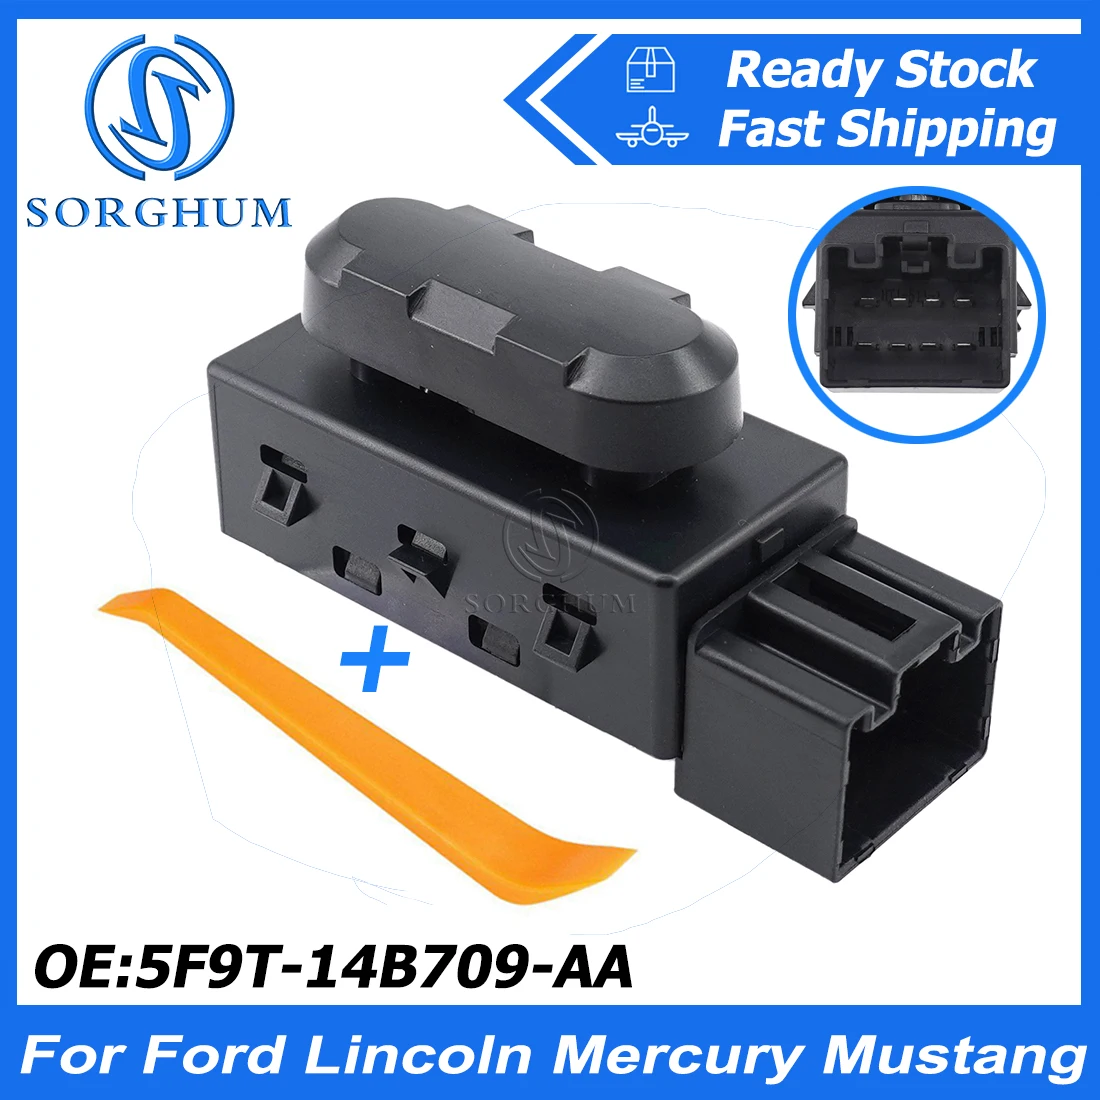 

Driver & Passenger Side Power Seat Switch 5F9T-14B709-AA 9L3T-14B709-AA for Ford Lincoln Mercury Mustang Edge Escape Expedition